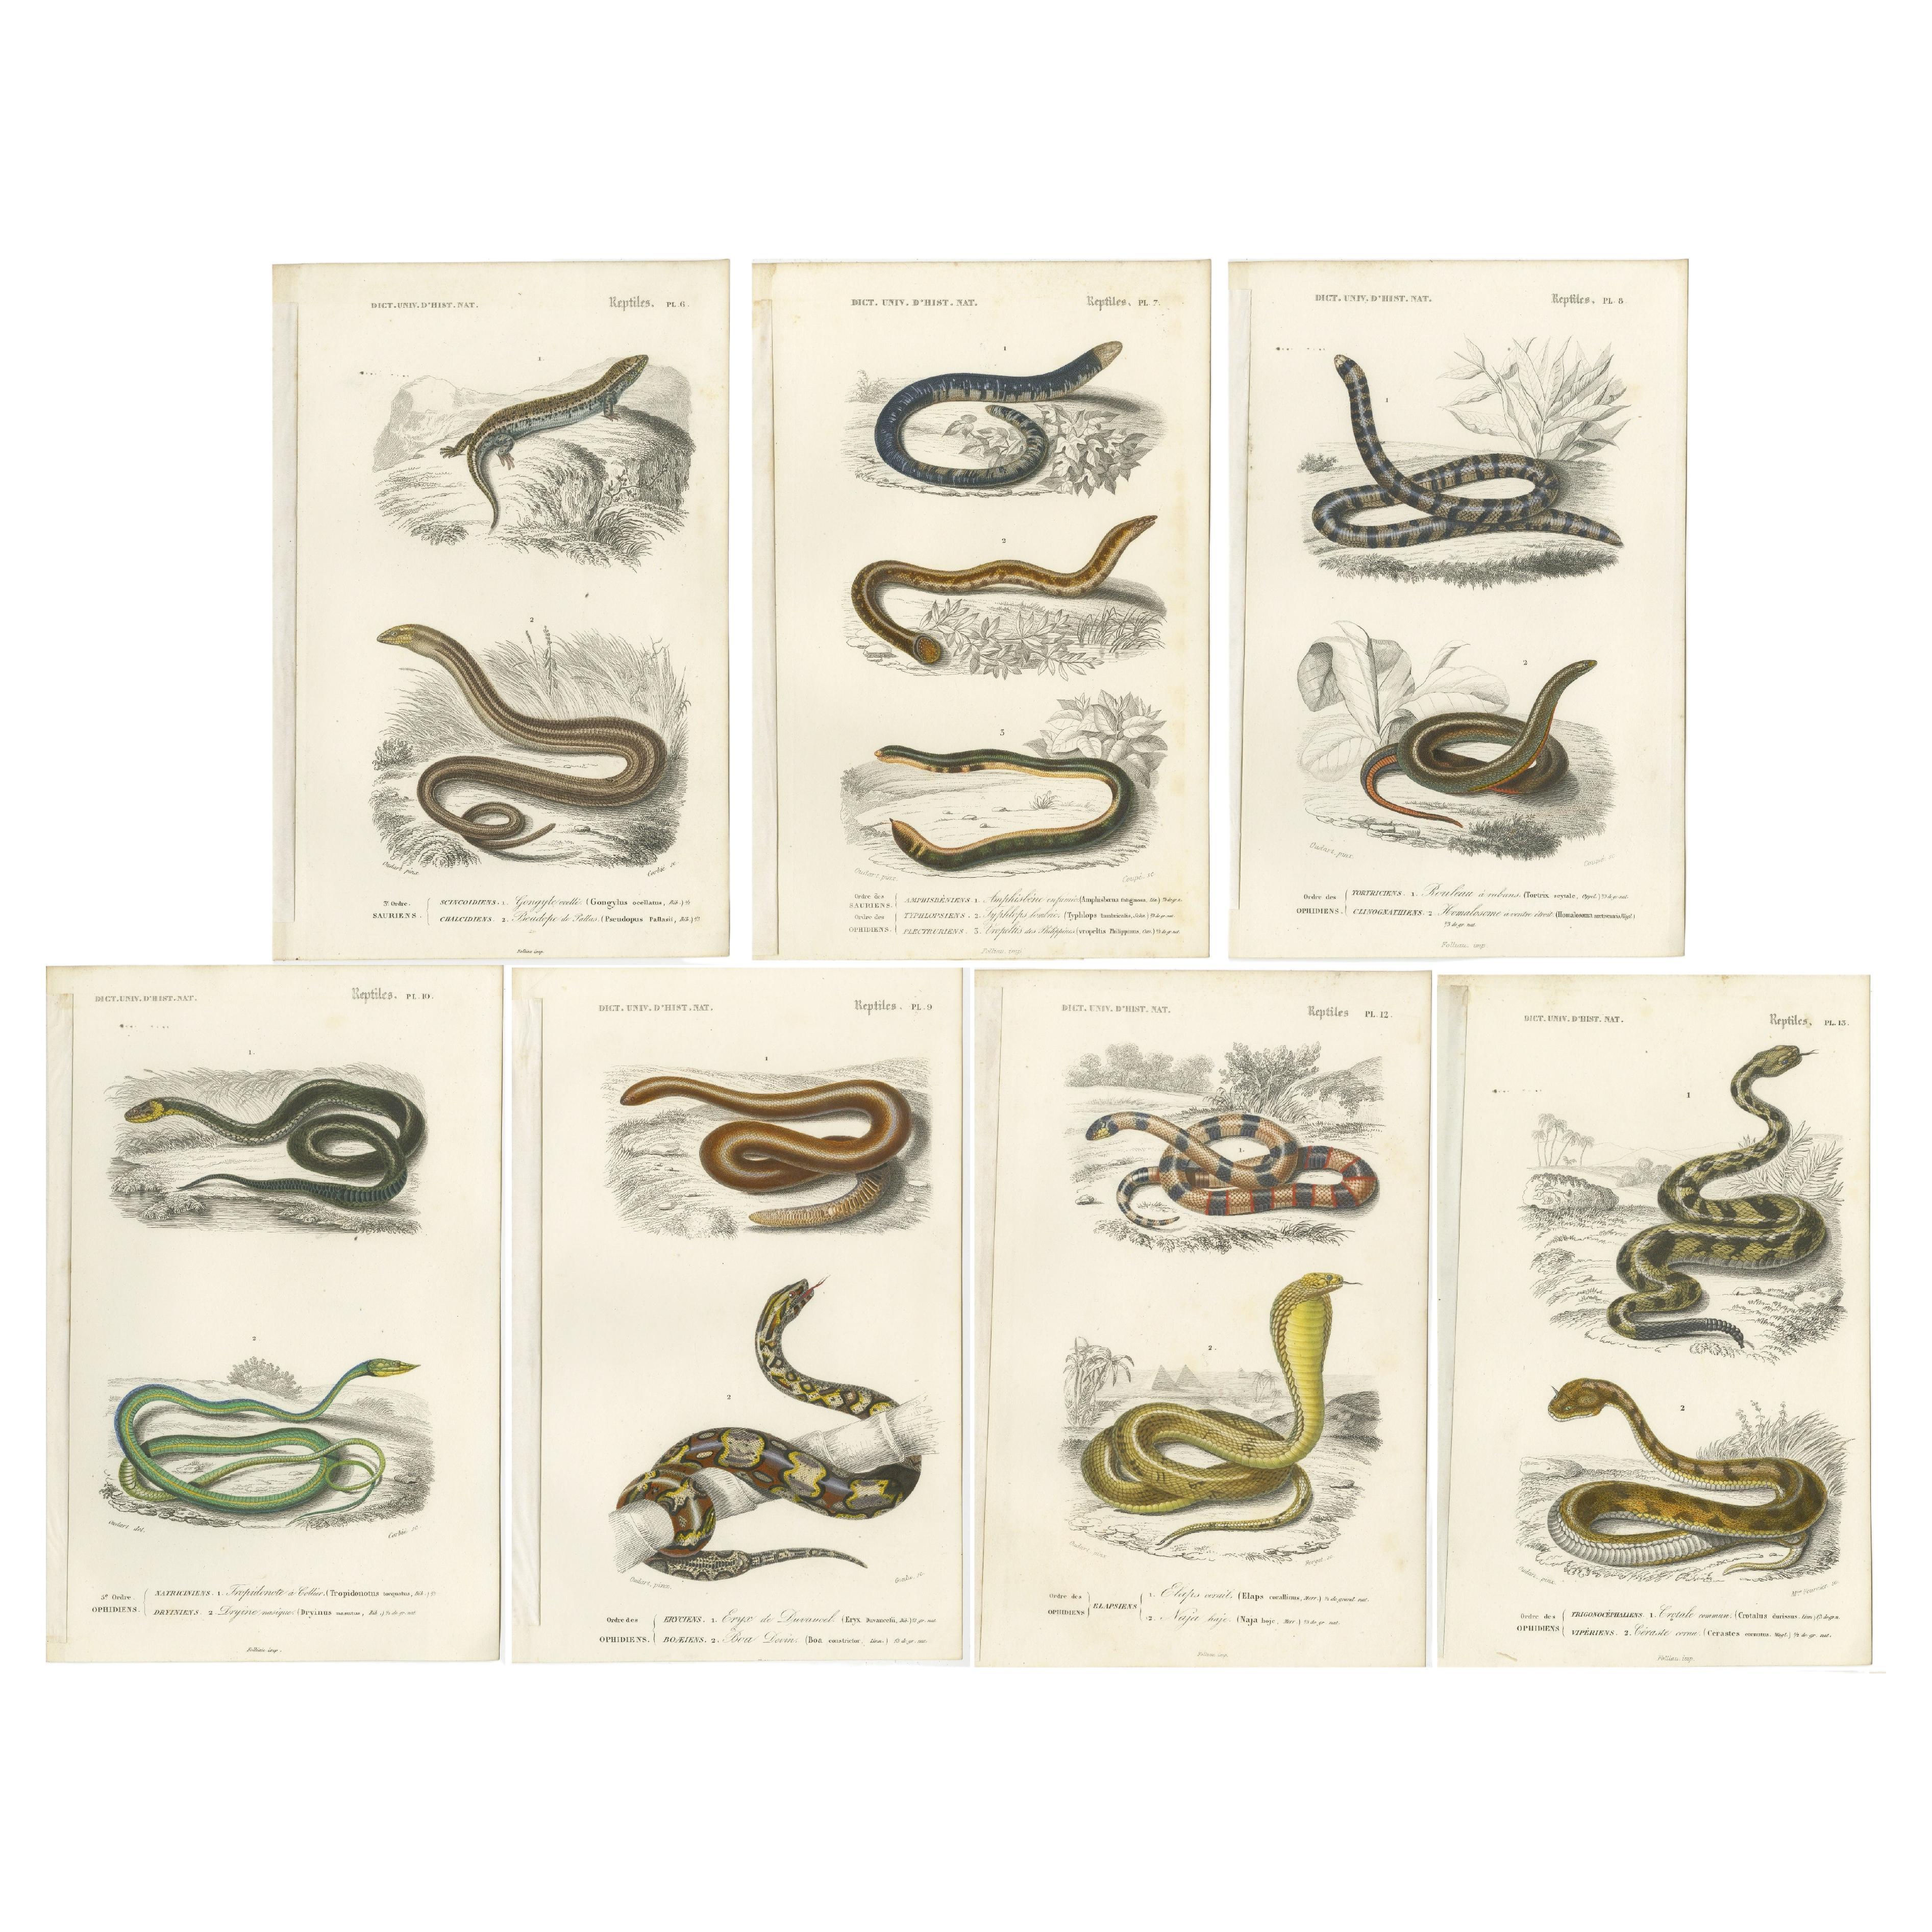 Set of 7 Antique Prints of an Egyptian Cobra and other Snakes and Reptiles